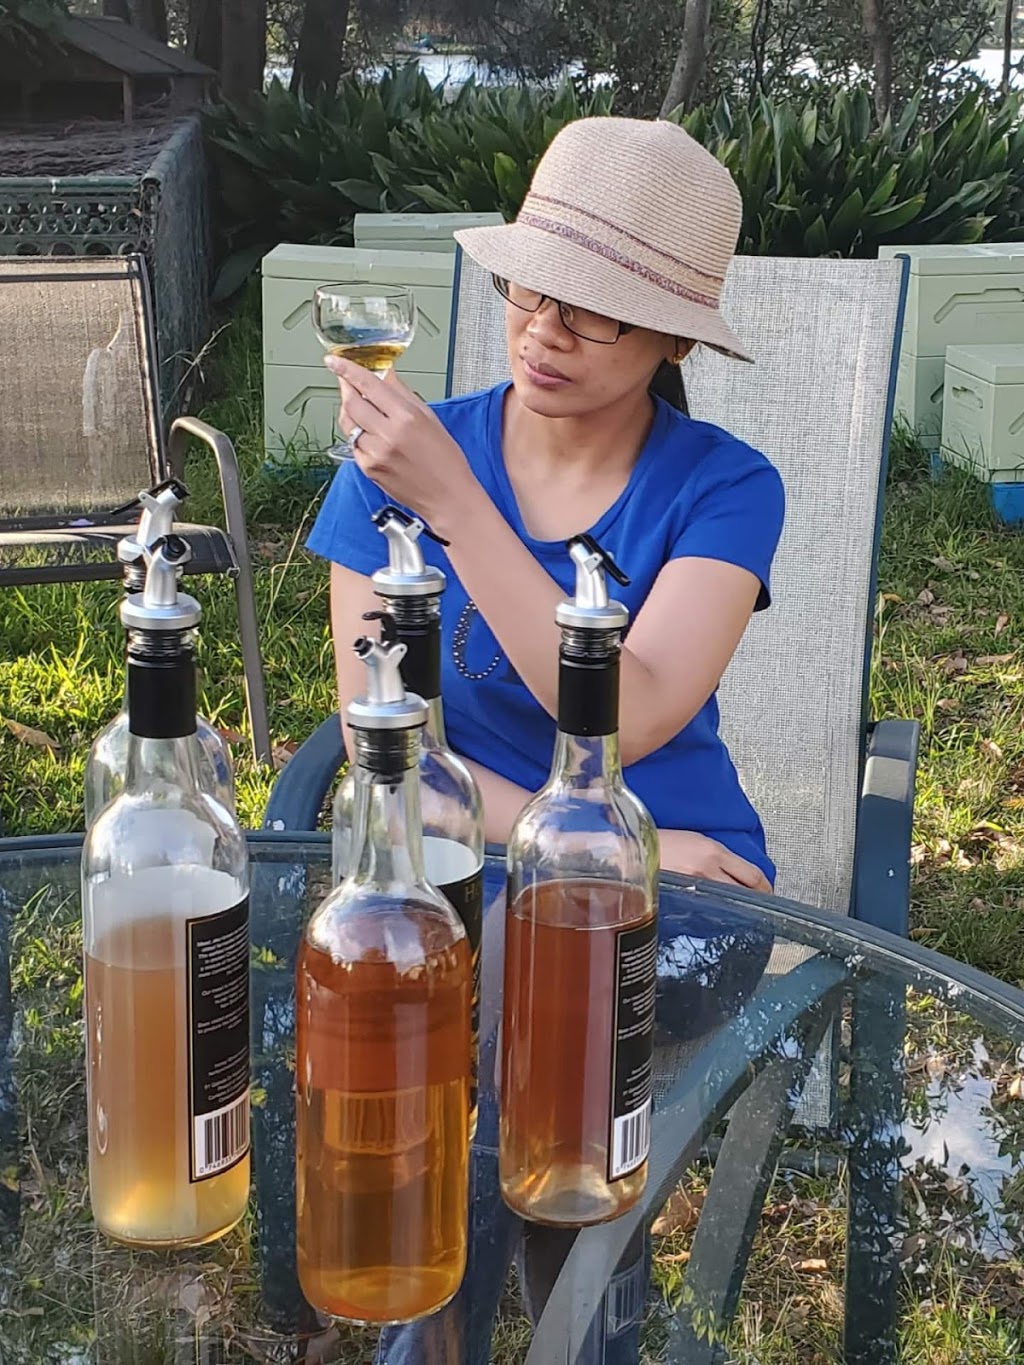 Honey Wines Australia Meadery - By Appointment | food | Lake St, Blackalls Park NSW 2283, Australia | 0413351775 OR +61 413 351 775